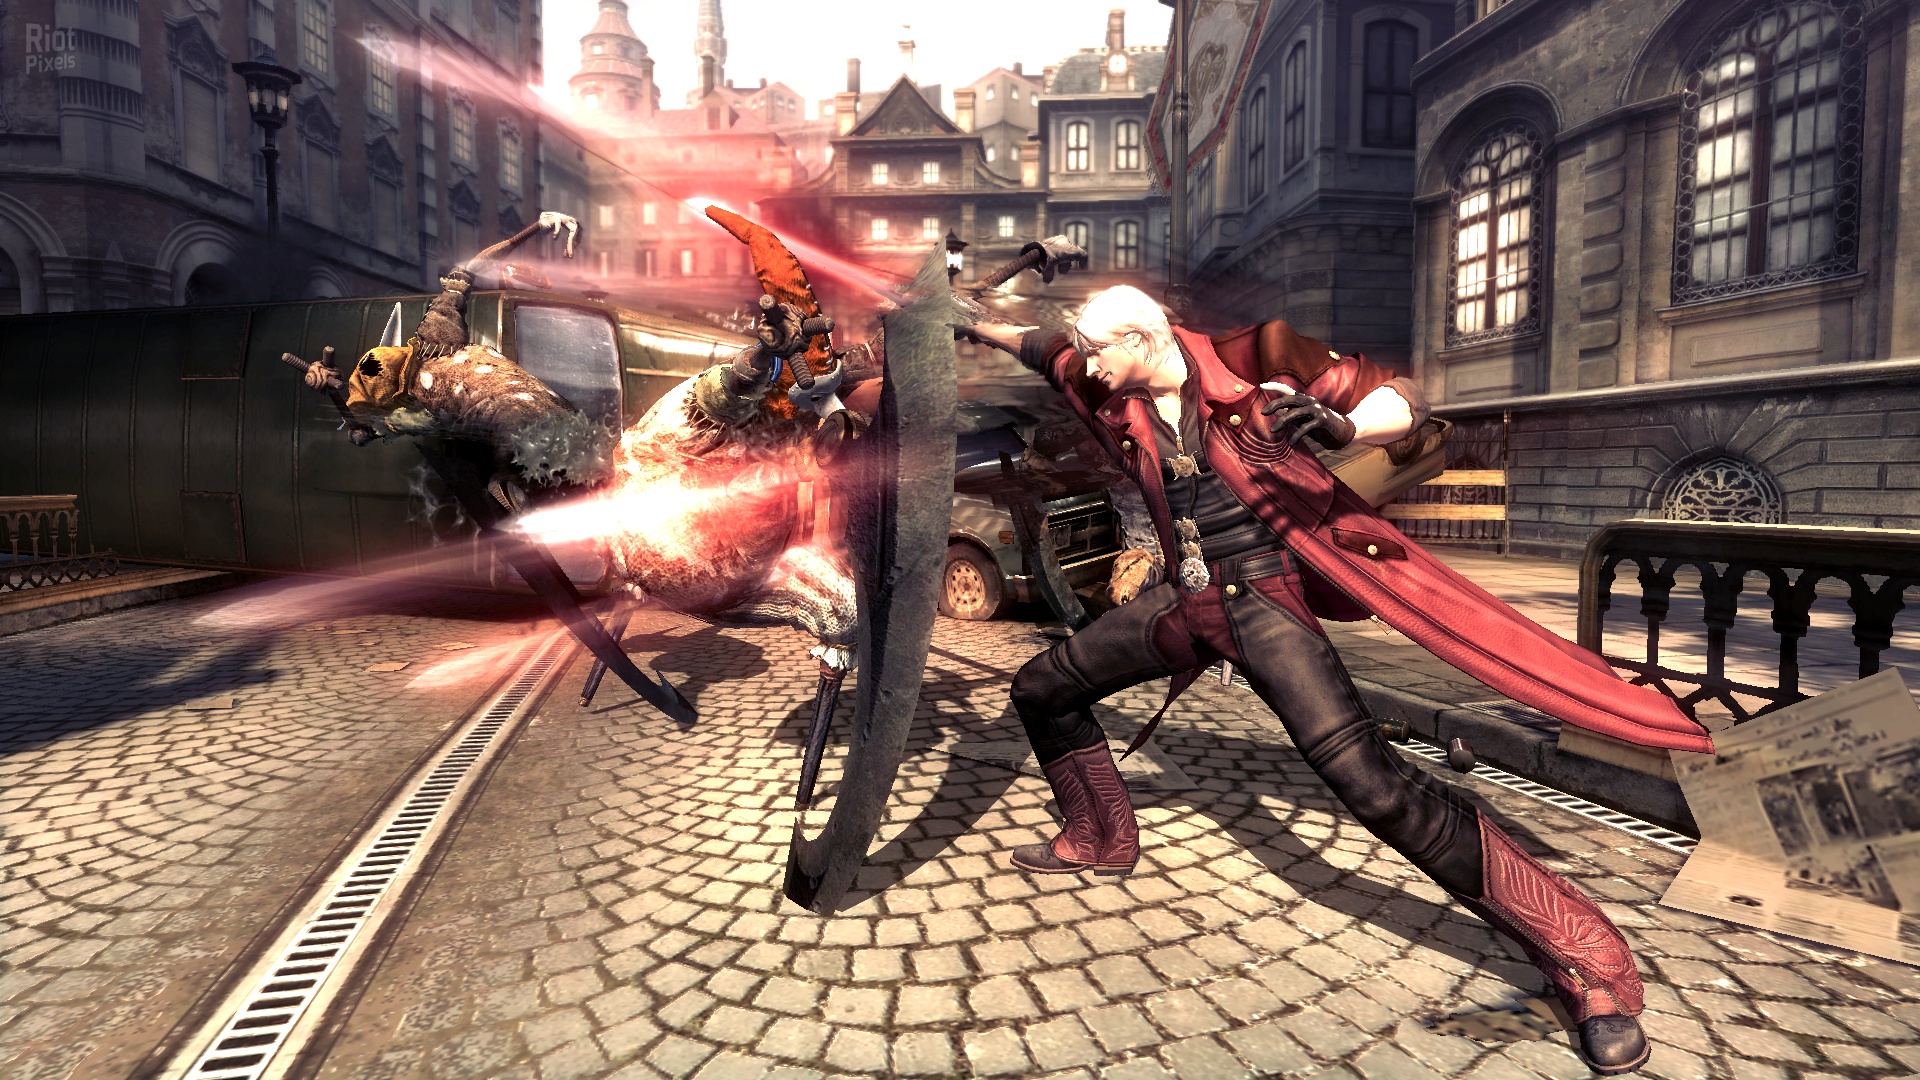 Devil may cry game. DMC 4 ps3. Devil May Cry 4: Special Edition. Вумшд ьфк СКН 4 ызусуфду.